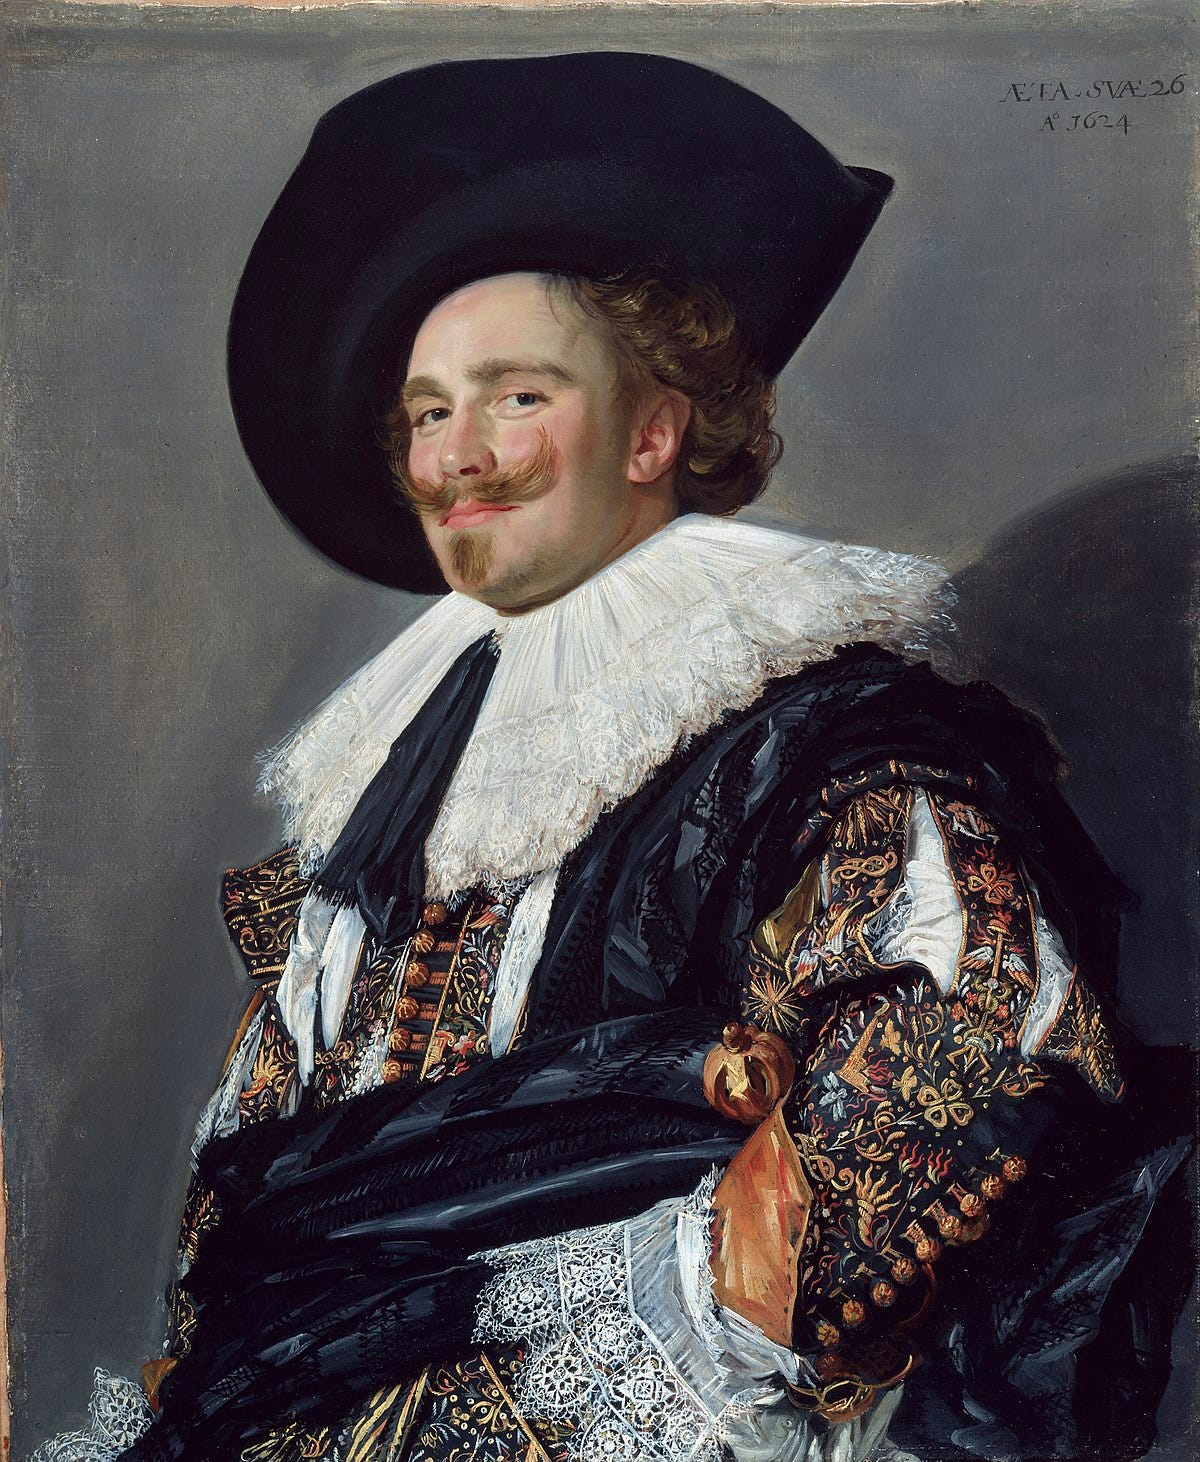 Laughing Cavalier - Wikipedia